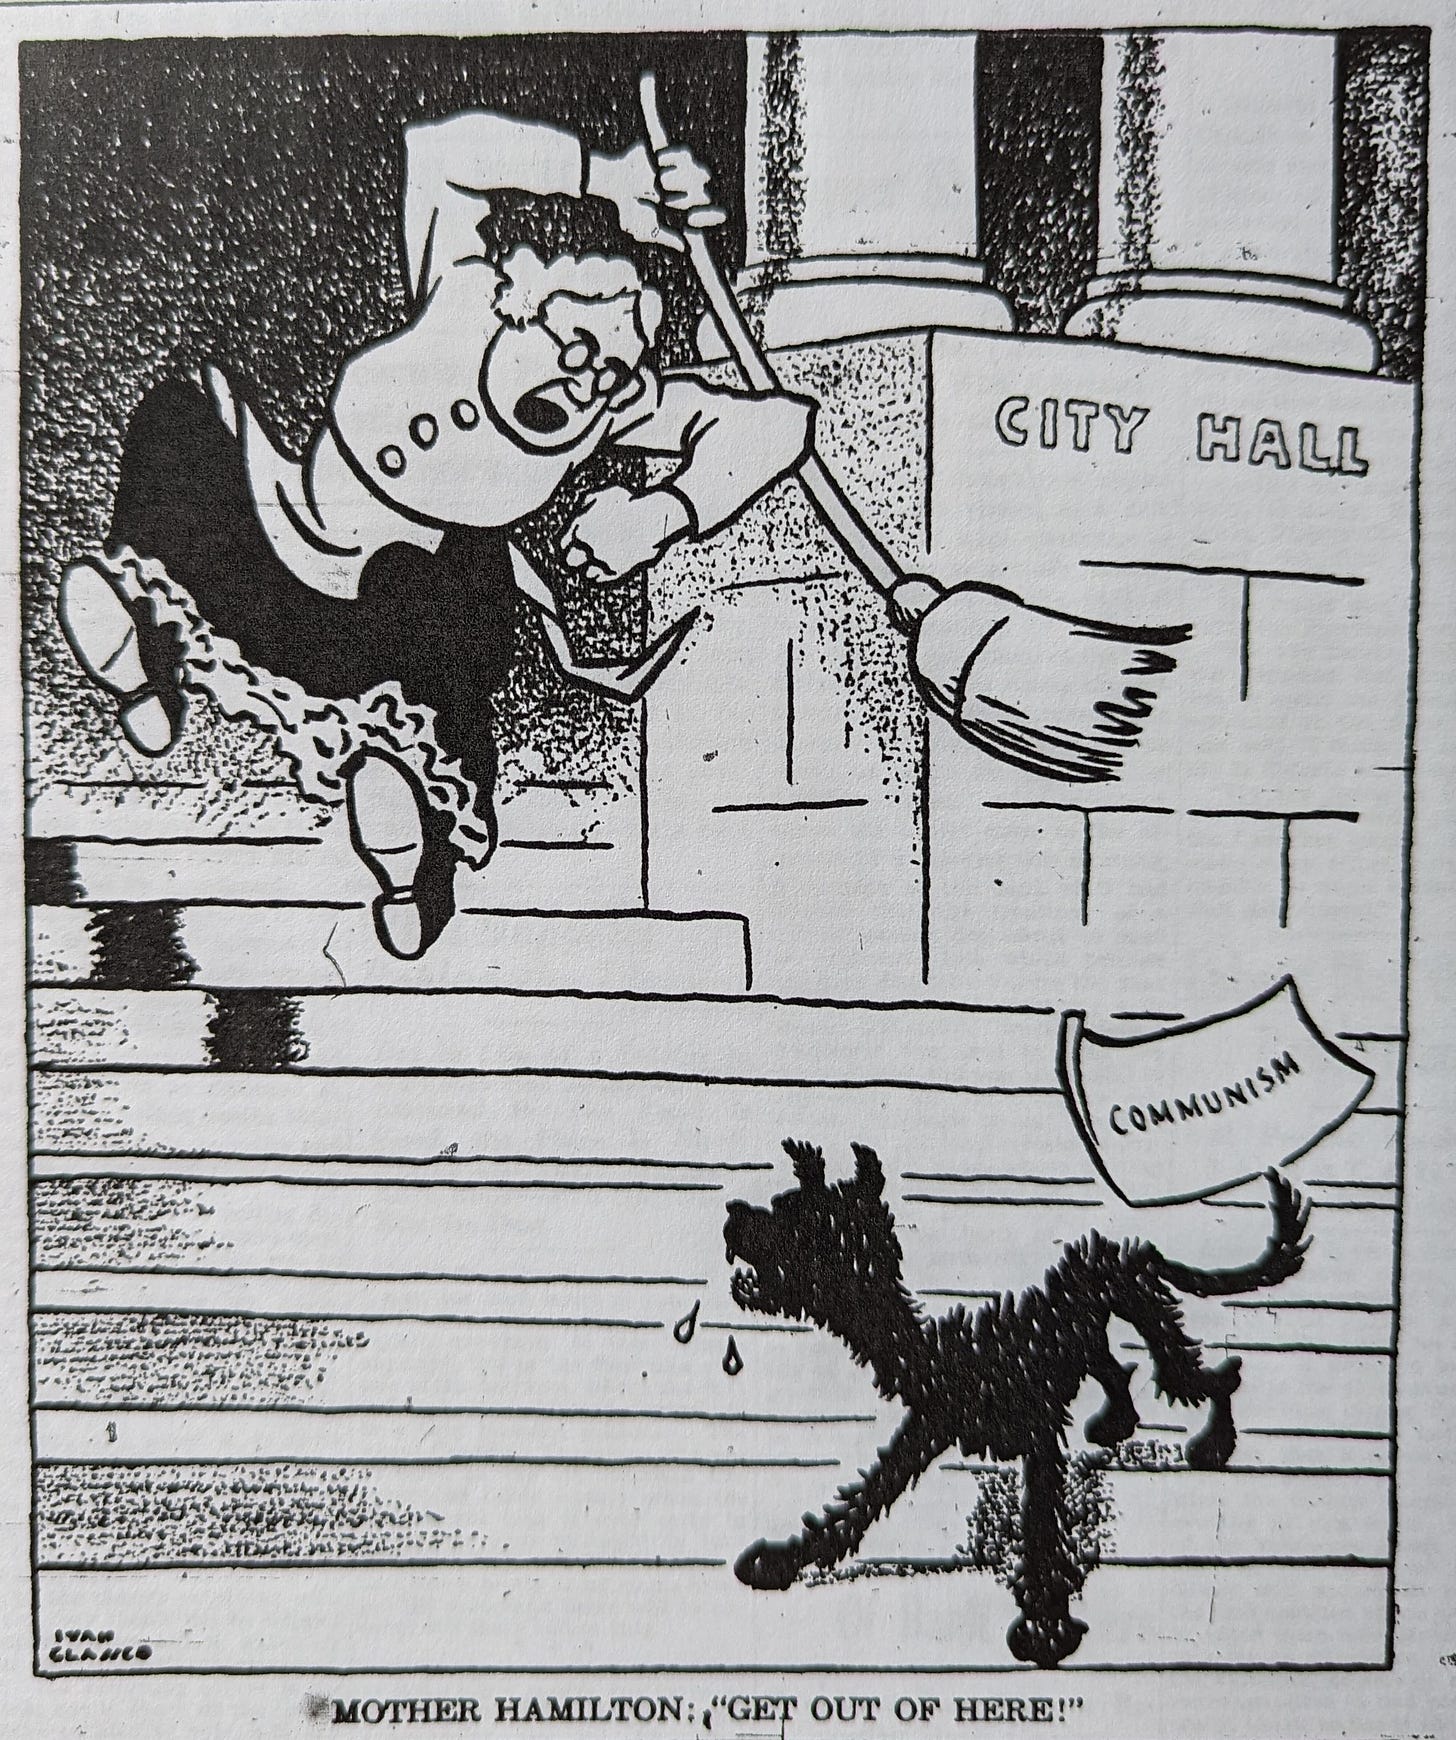 An editorial cartoon from the Hamilton Spectator in 1939 portraying "Mother Hamilton" - an old woman with a broom - on the steps of City Hall, attempting to chase away a dog labeled "communism".